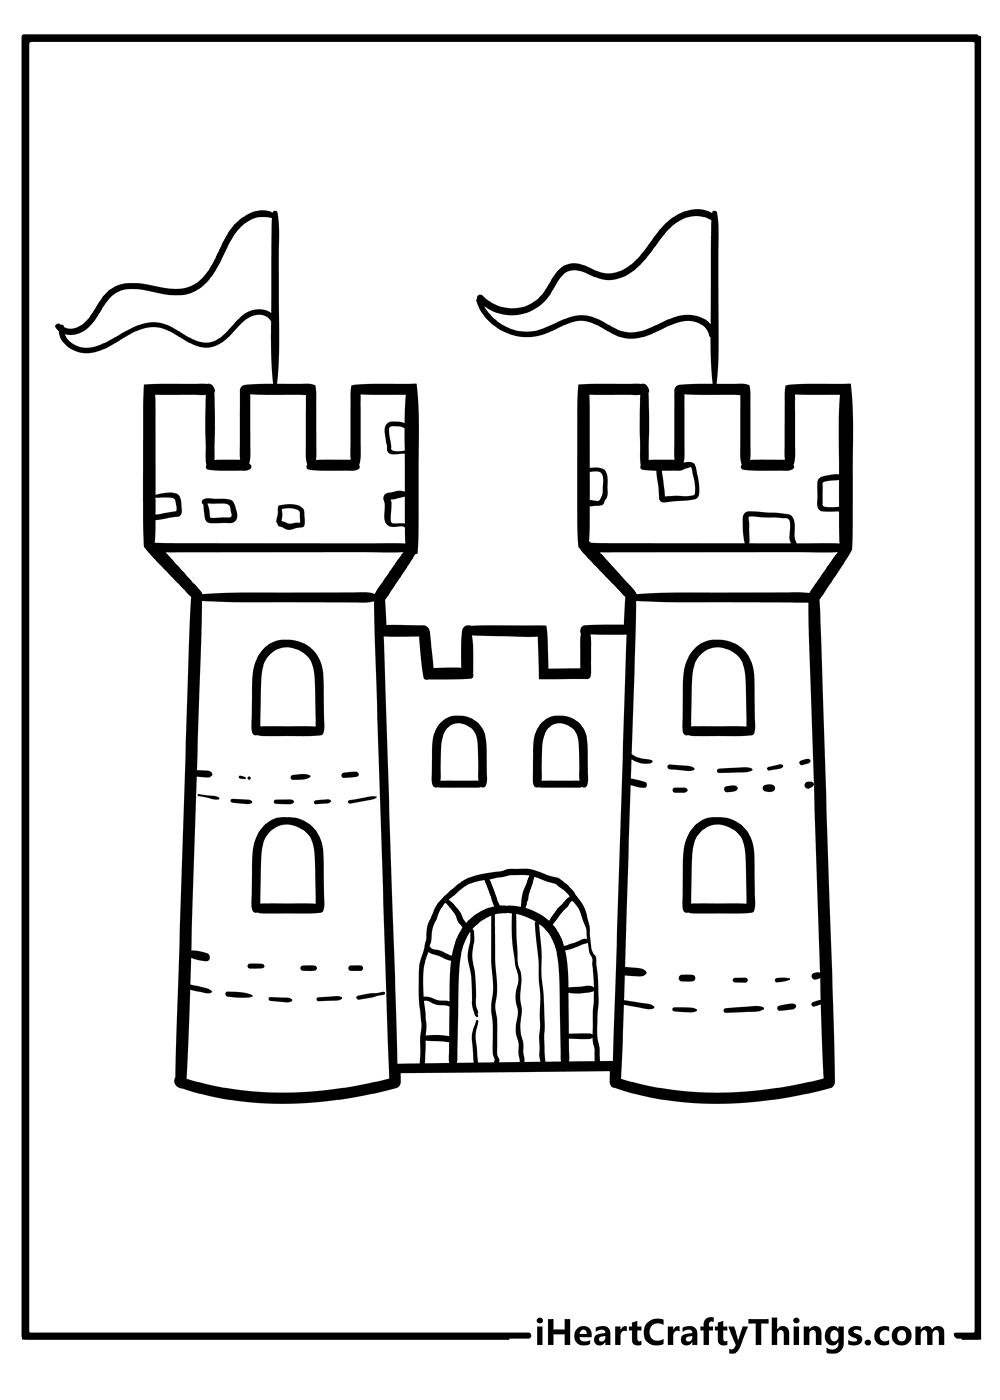 Castle coloring pages free printables